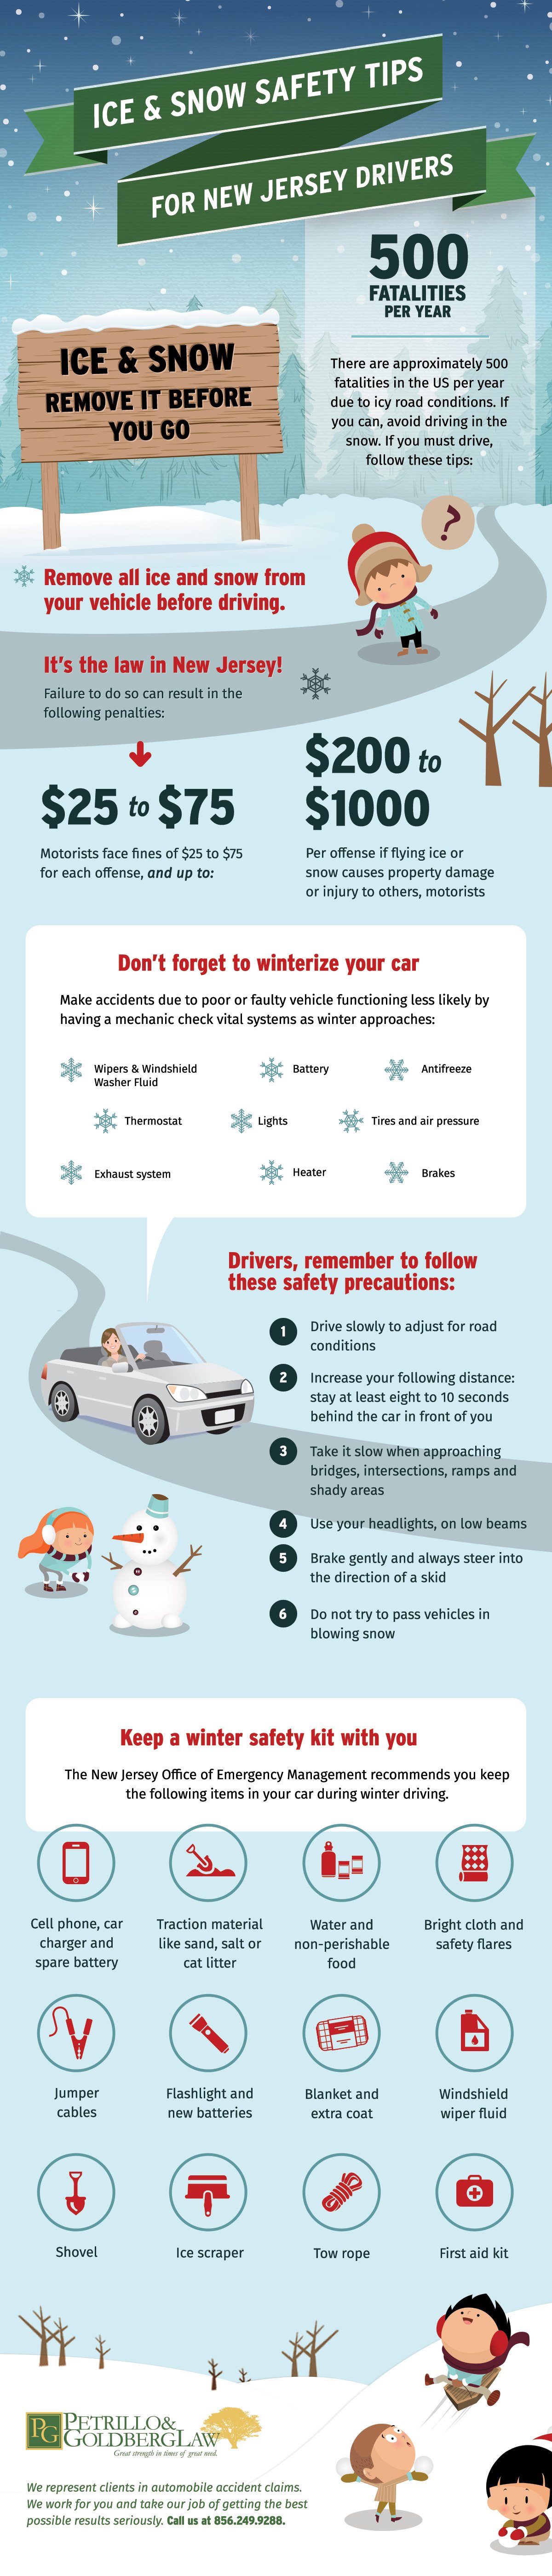 Ice & Snow Safety Tips for New Jersey Drivers